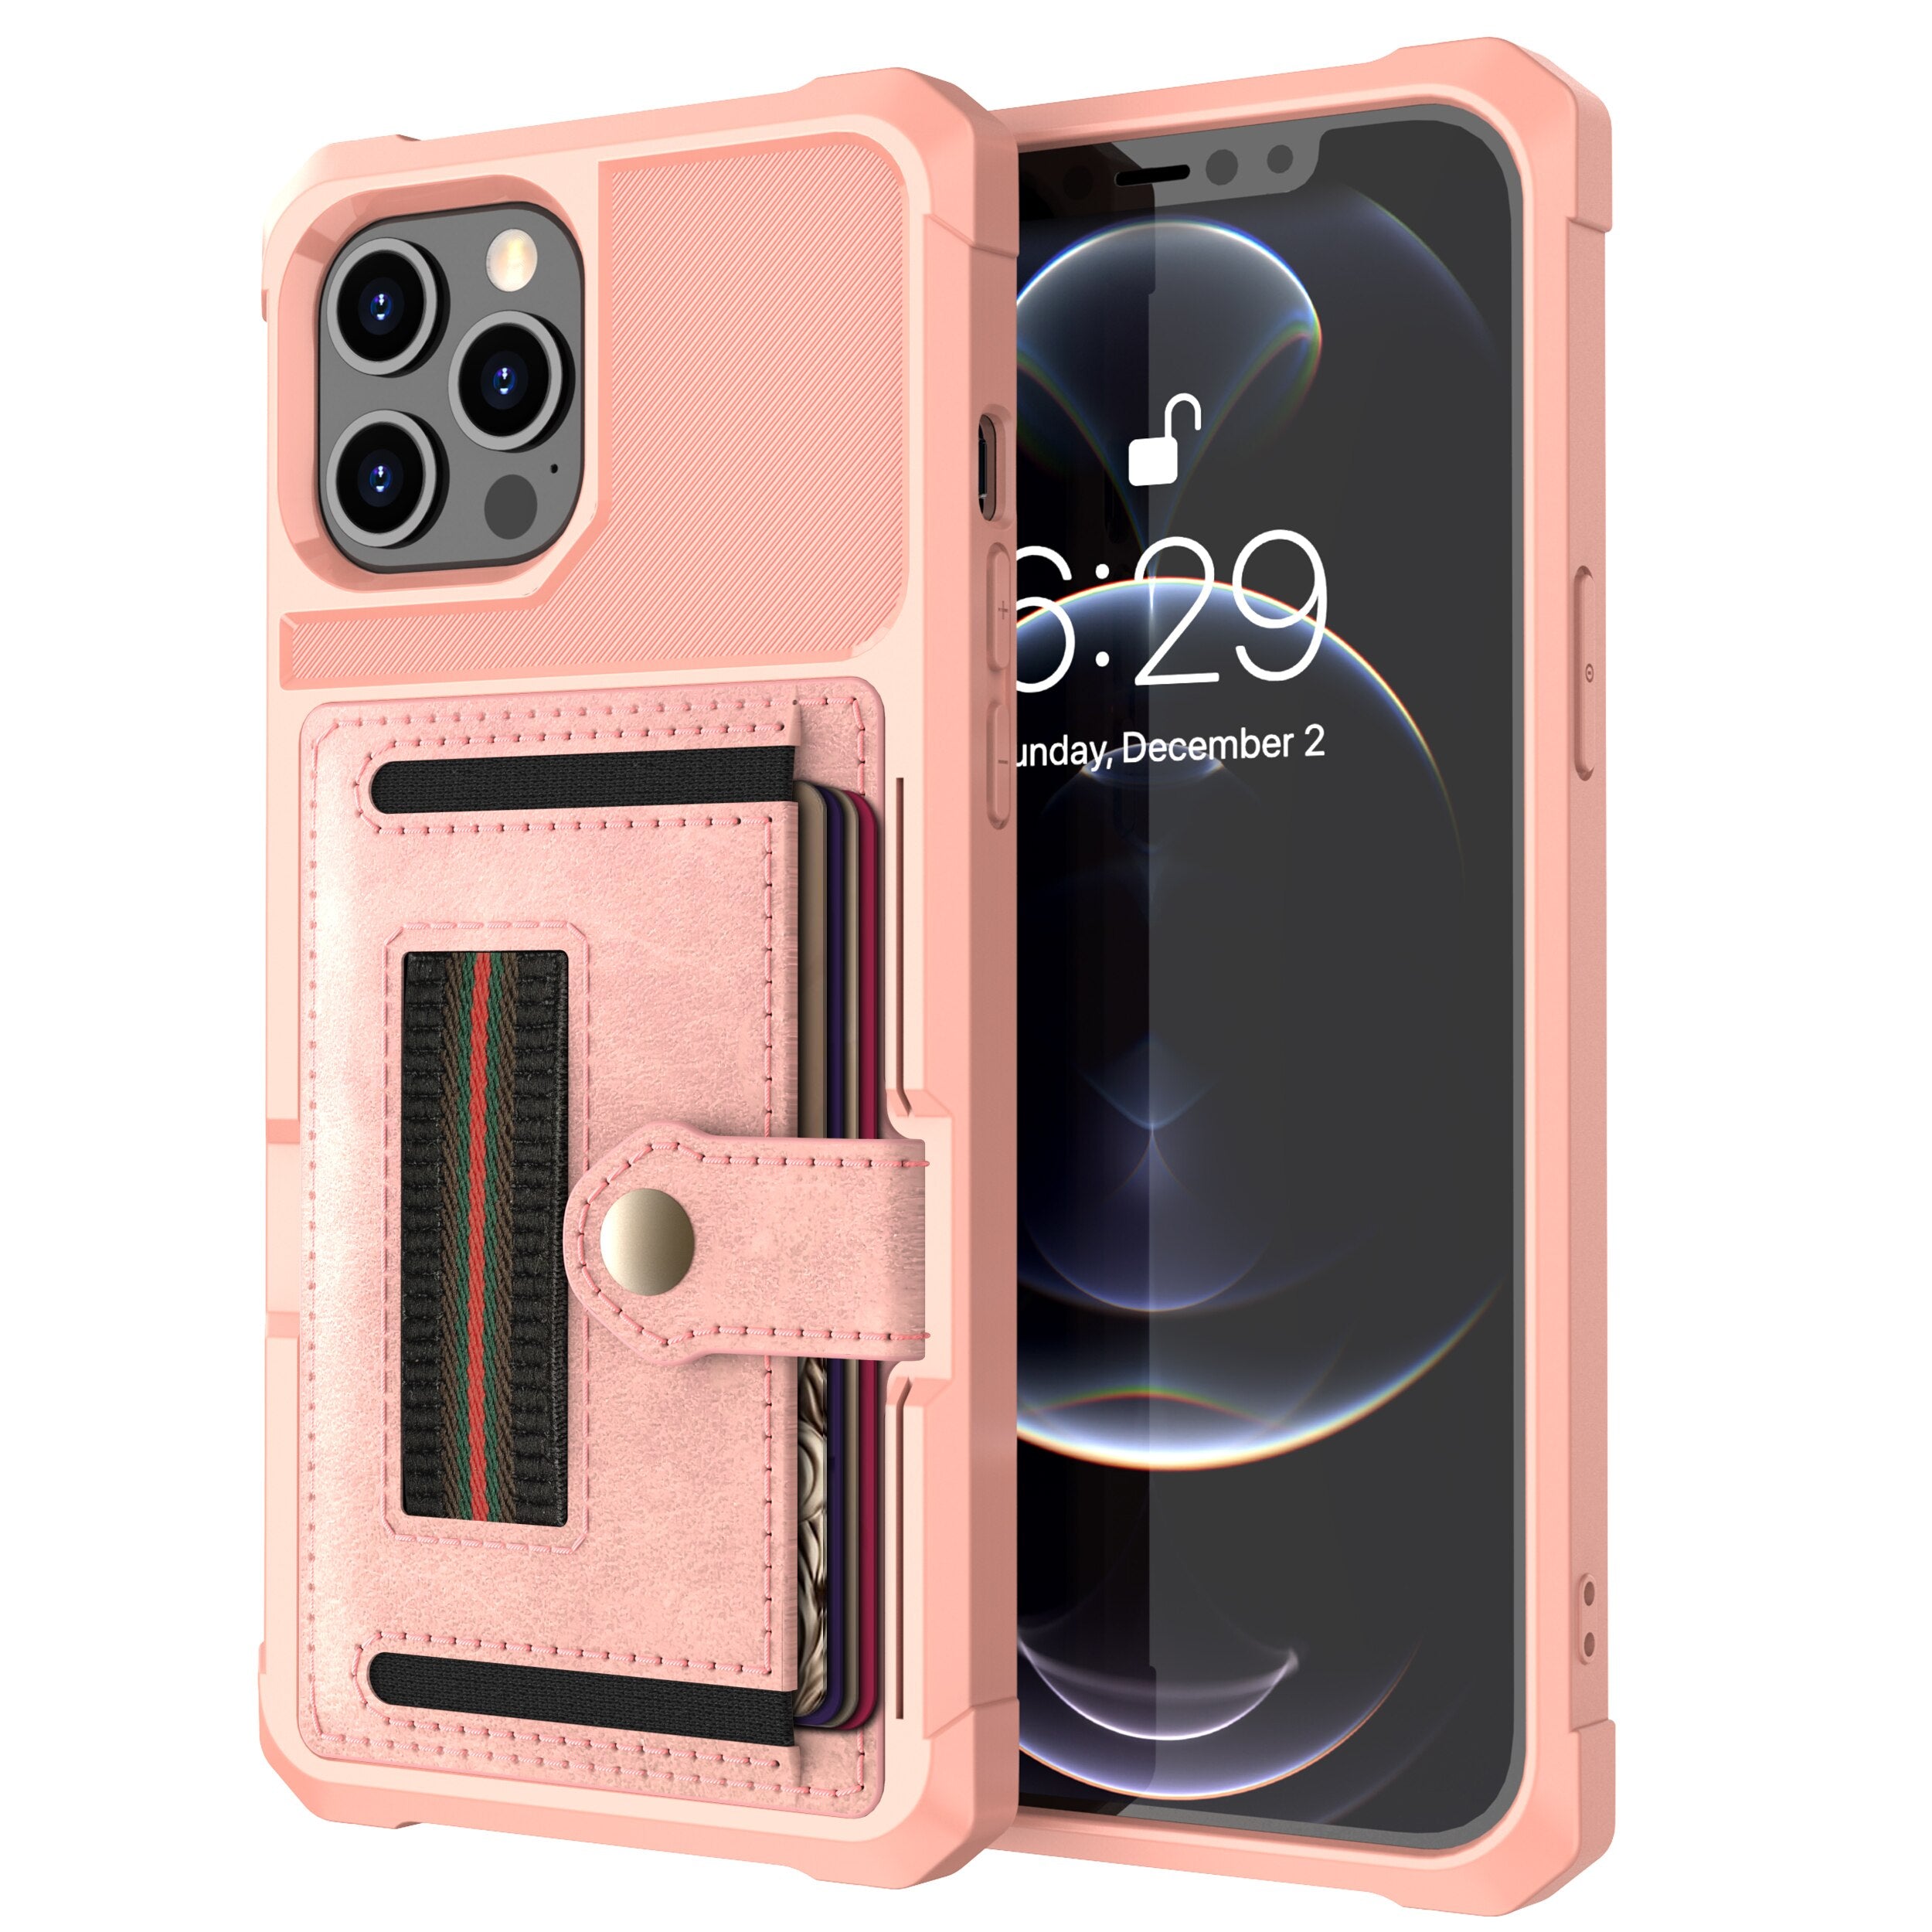 Case for iPhone 11 12 Luxury Slim Fit Premium Leather Cover For iPhone 11 12 mini Pro Max Wallet Card Slots Shockproof Flip Case - 380230 For iPhone 11 / Pink / United States Find Epic Store